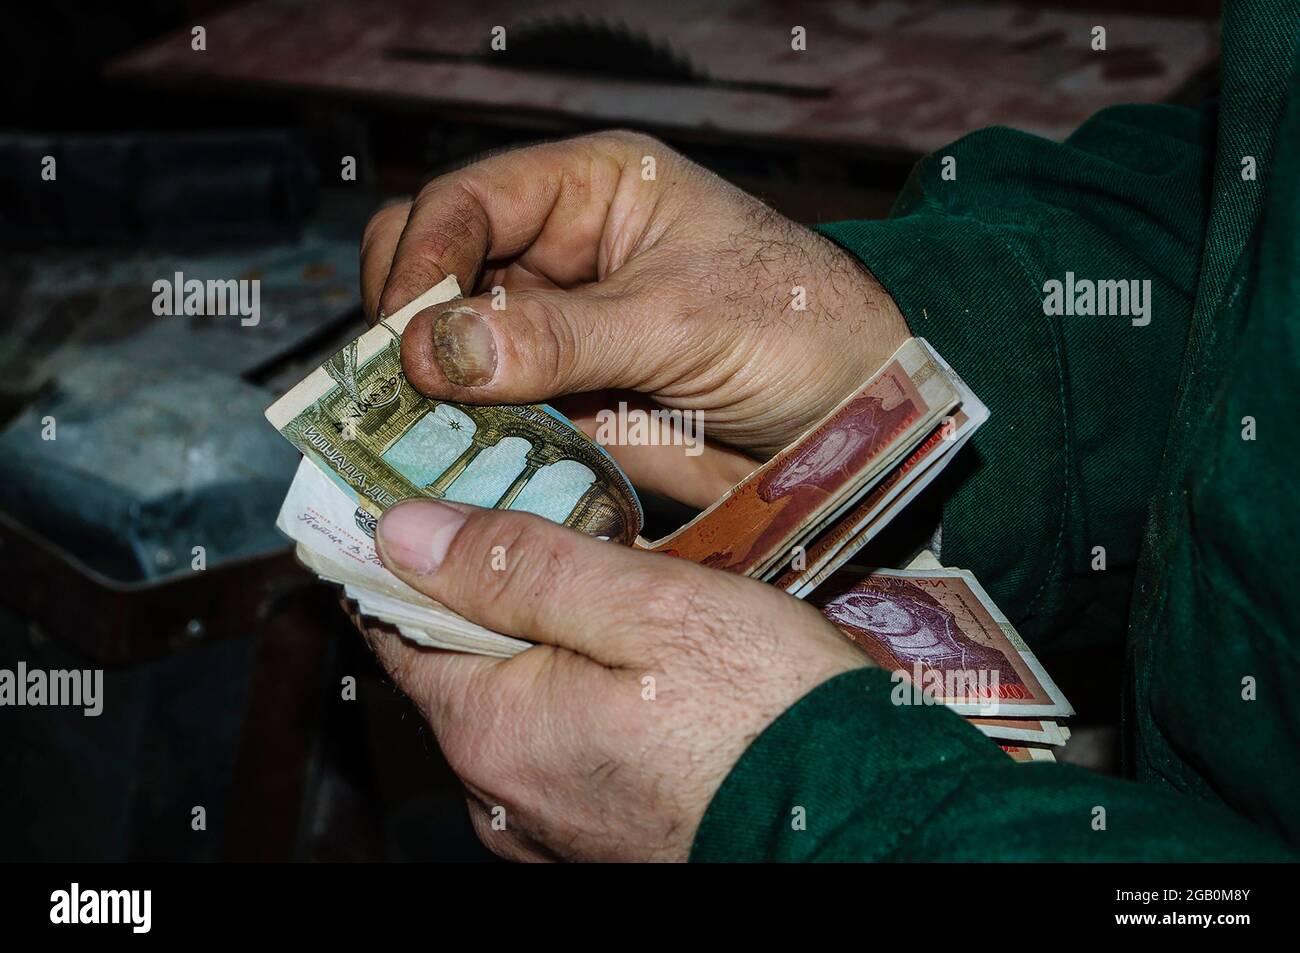 Man counting money, economy concept, allocation of money. Workers hand counting paper money. Stock Photo